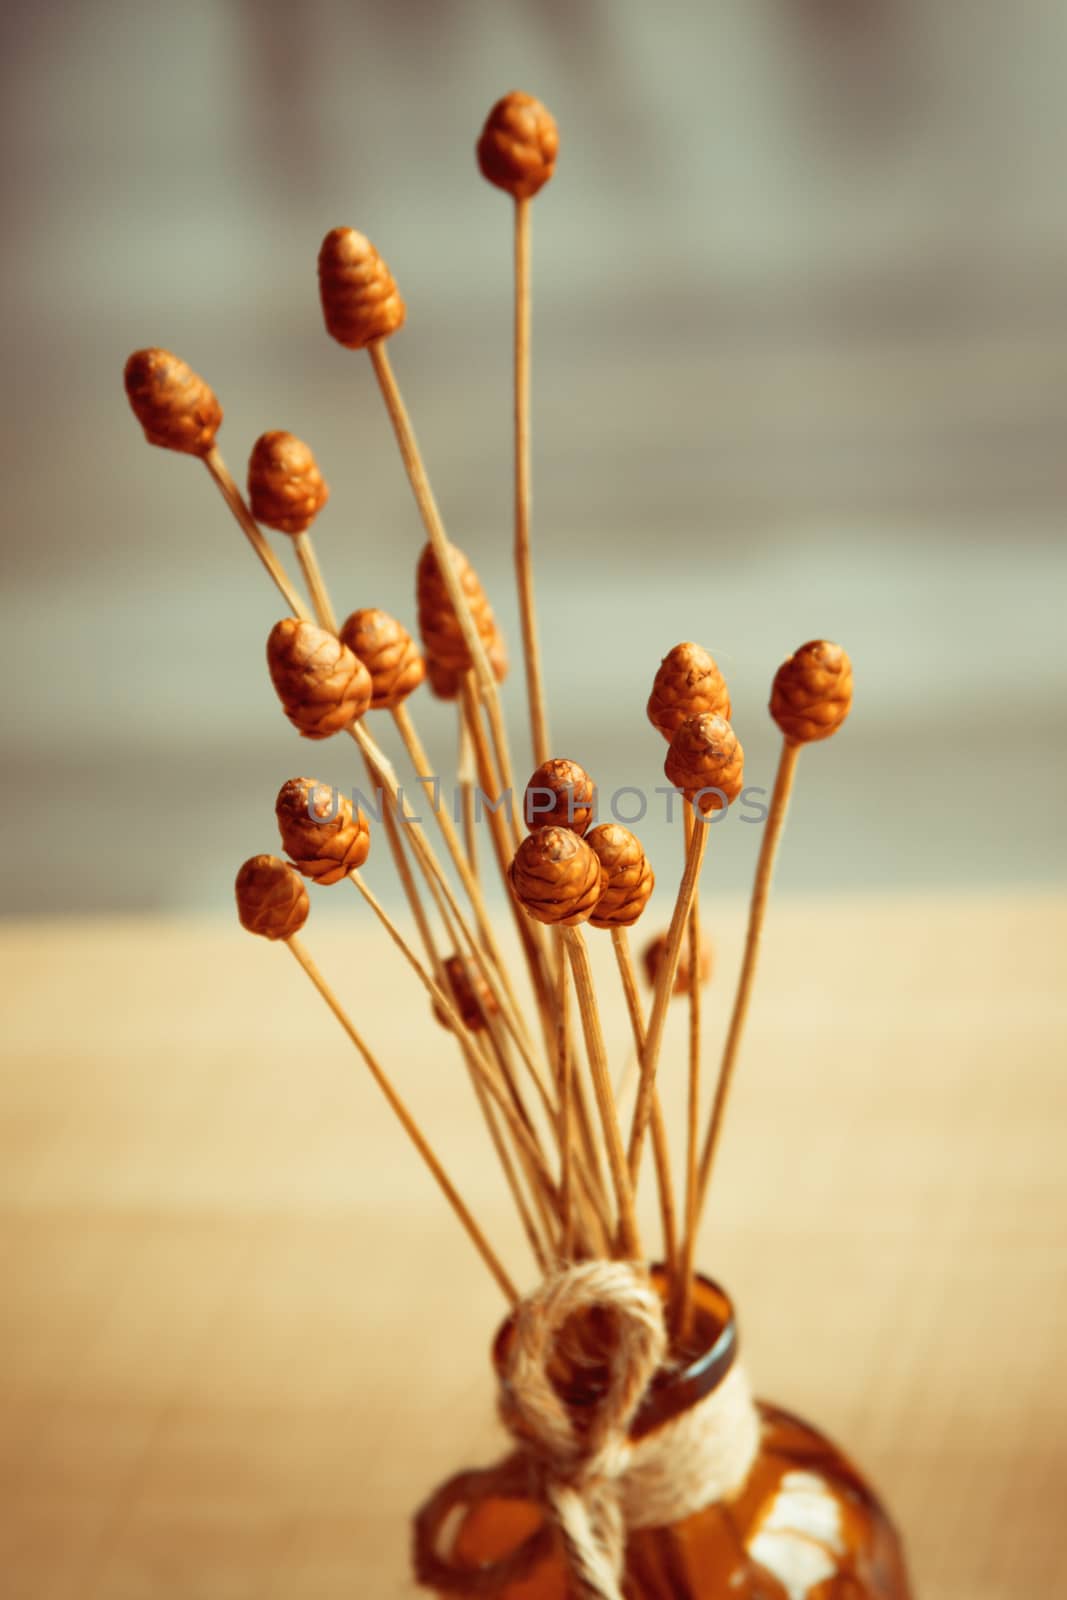 Dry grass flower with vase on wood background